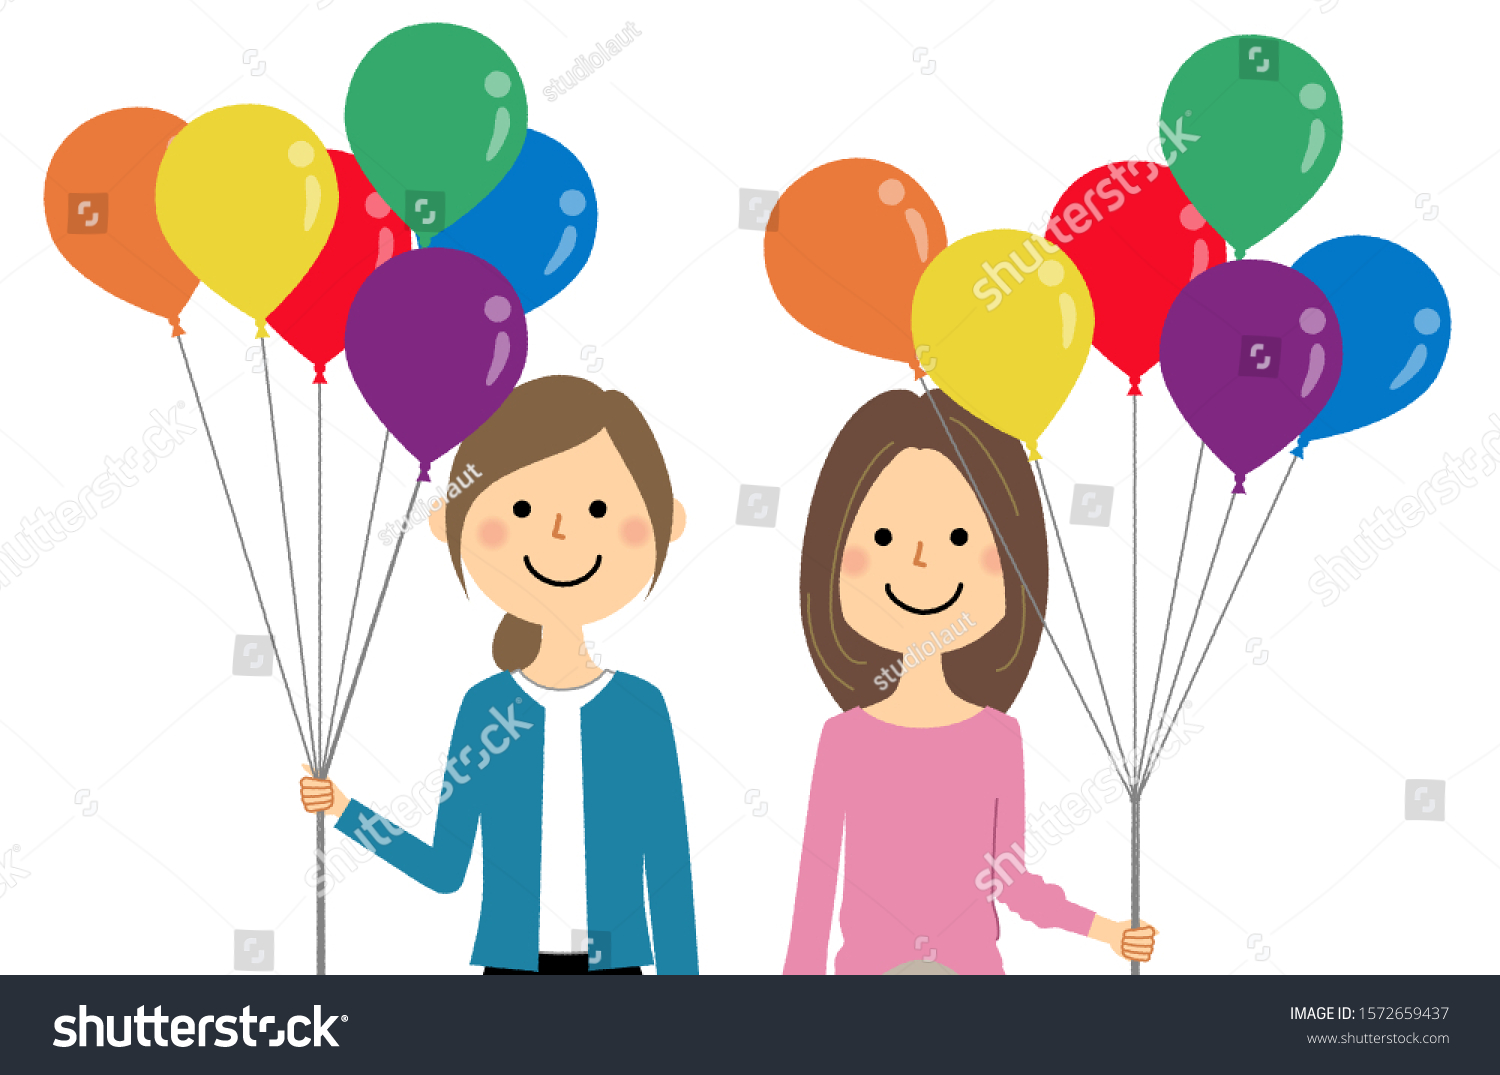 Illustration Same Sex Couple Rainbow Colored Stock Vector Royalty Free 1572659437 Shutterstock